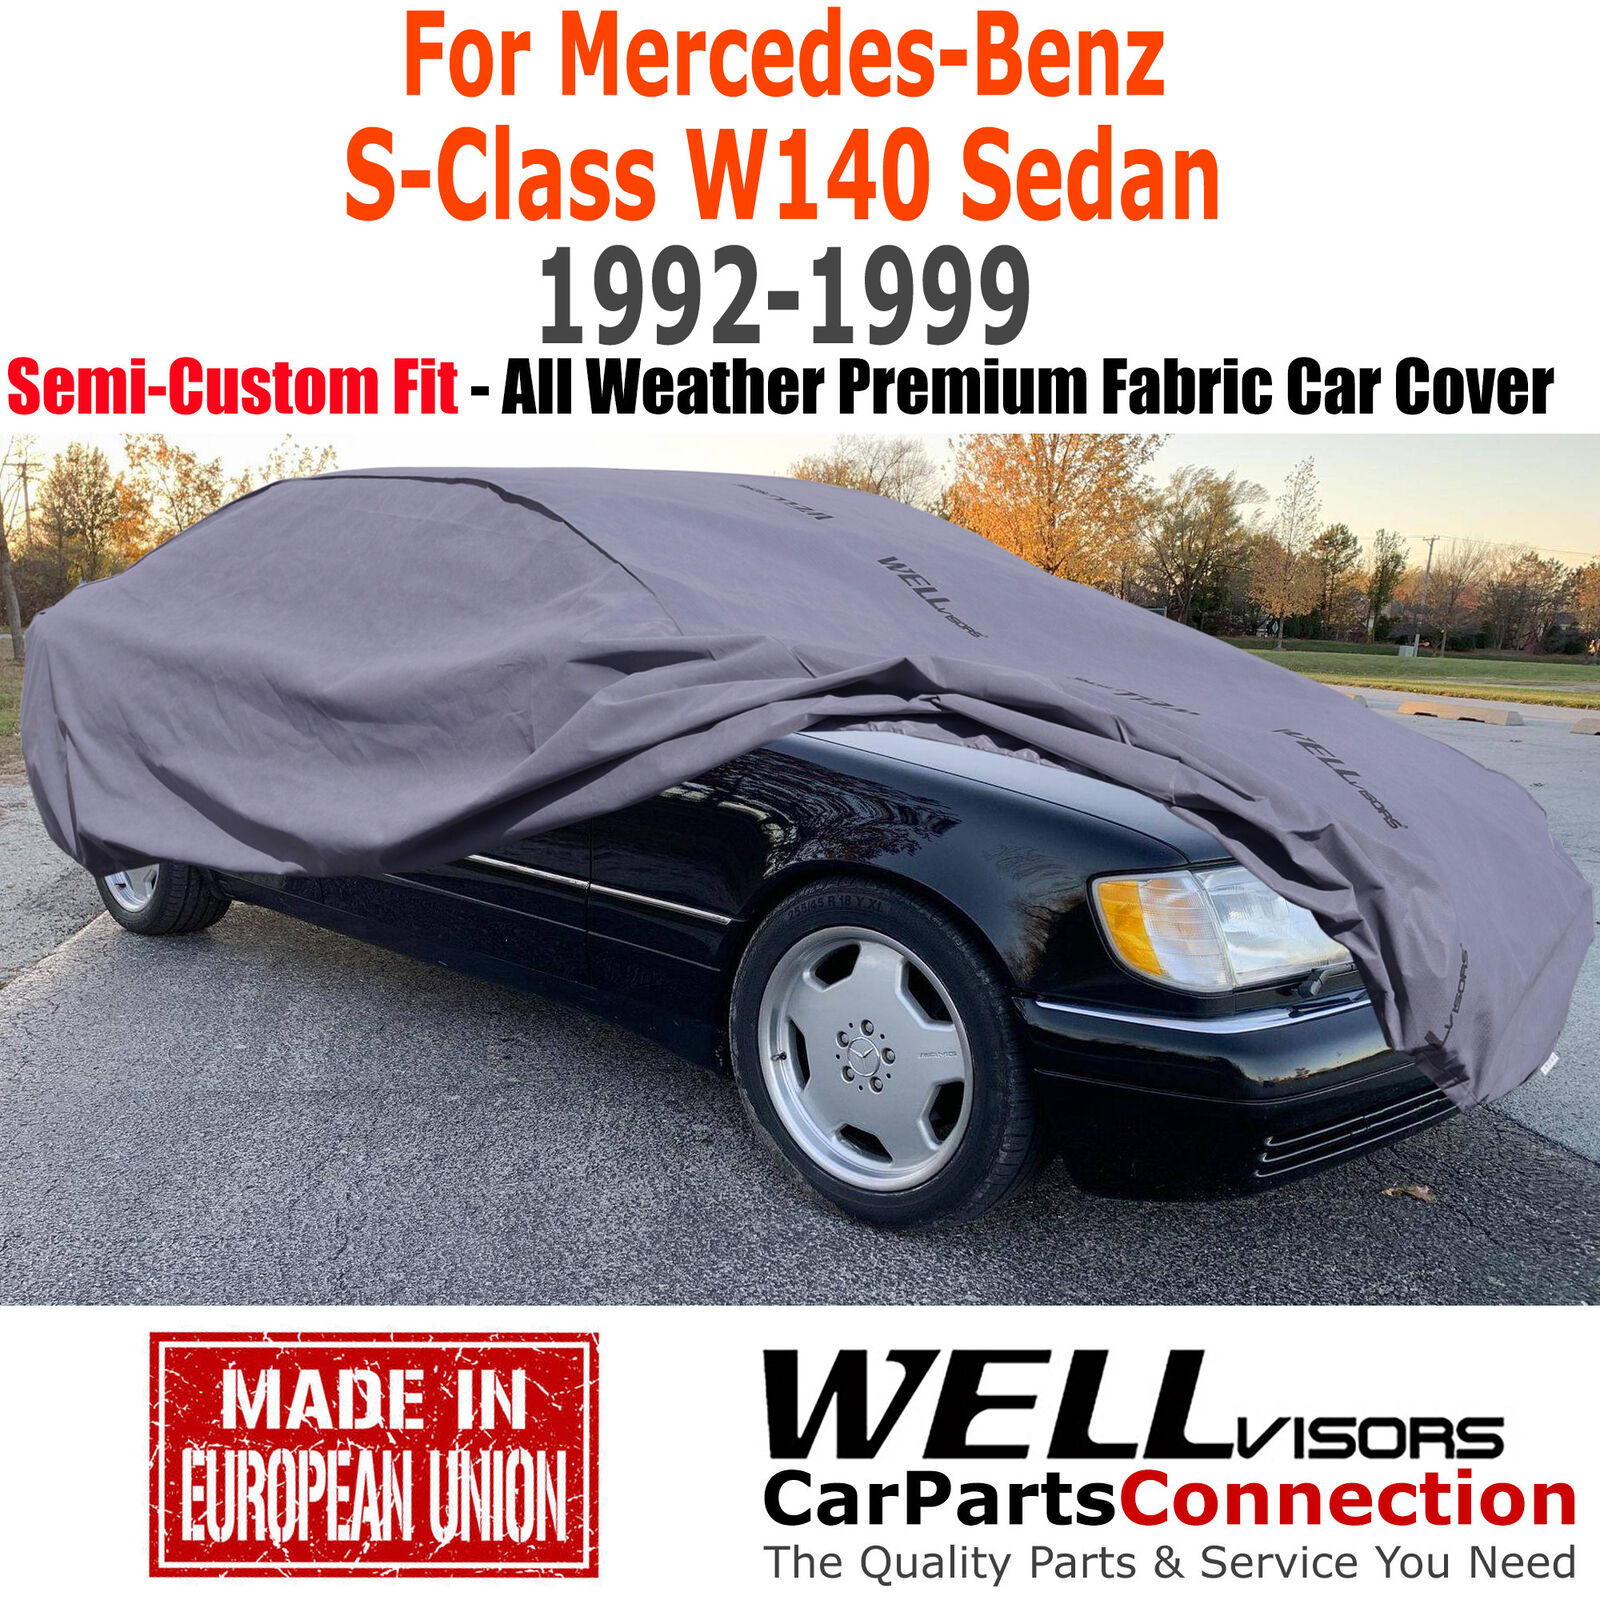 WellVisors All Weather Car Cover For 1992-1999 Mercedes S-Class W140 Sedan